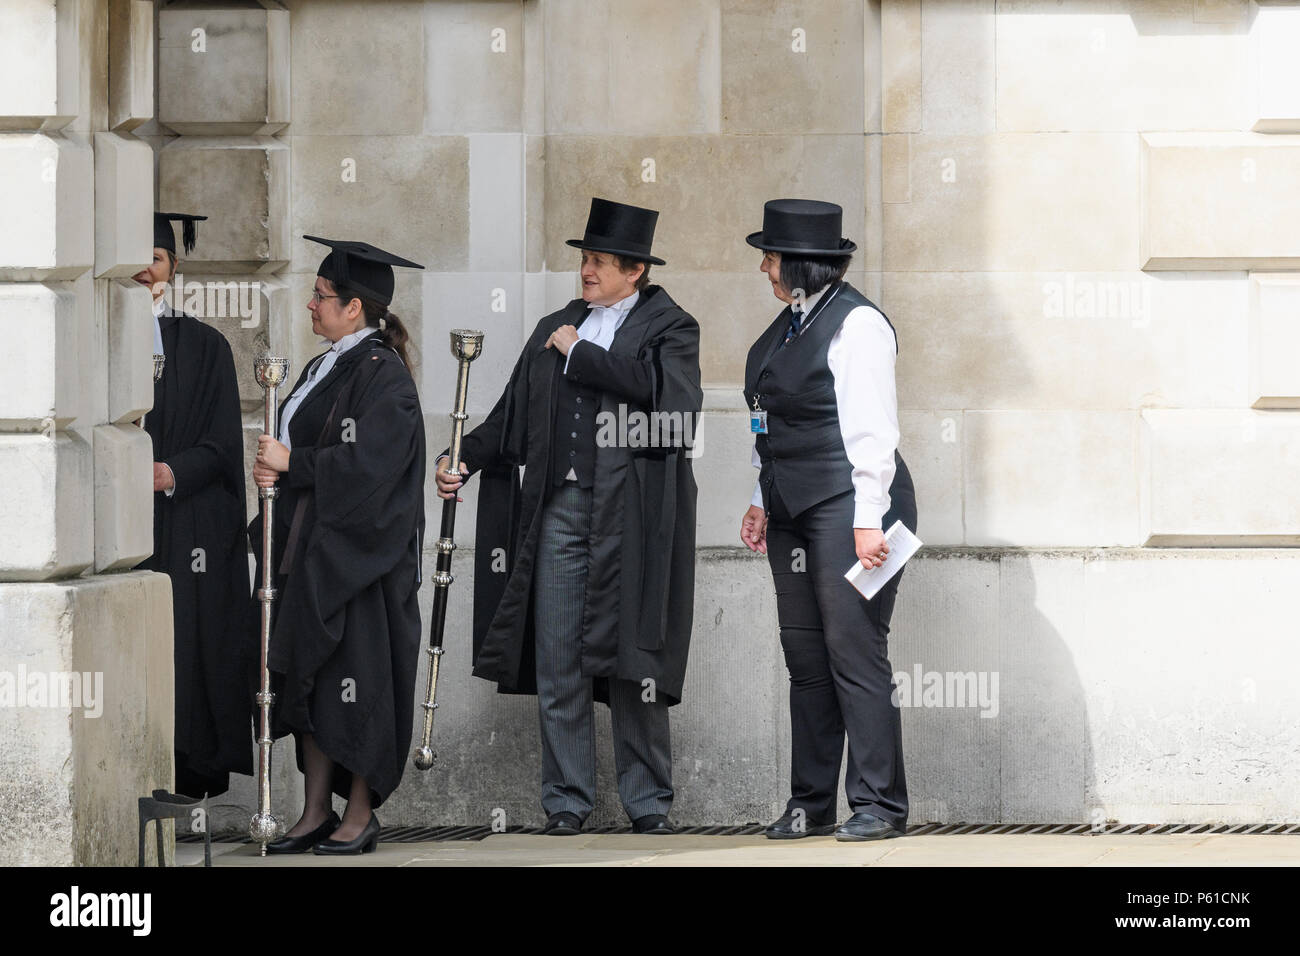 Cambridge, England. 28 June 2018. Esquire bedells with maces wait for the vice-chancellor, Stephen Toope, to process through the grounds of Senate House to the main building where he presides at the degree/graduation ceremony on 28th June 2018. Credit: Michael Foley/Alamy Live News Stock Photo